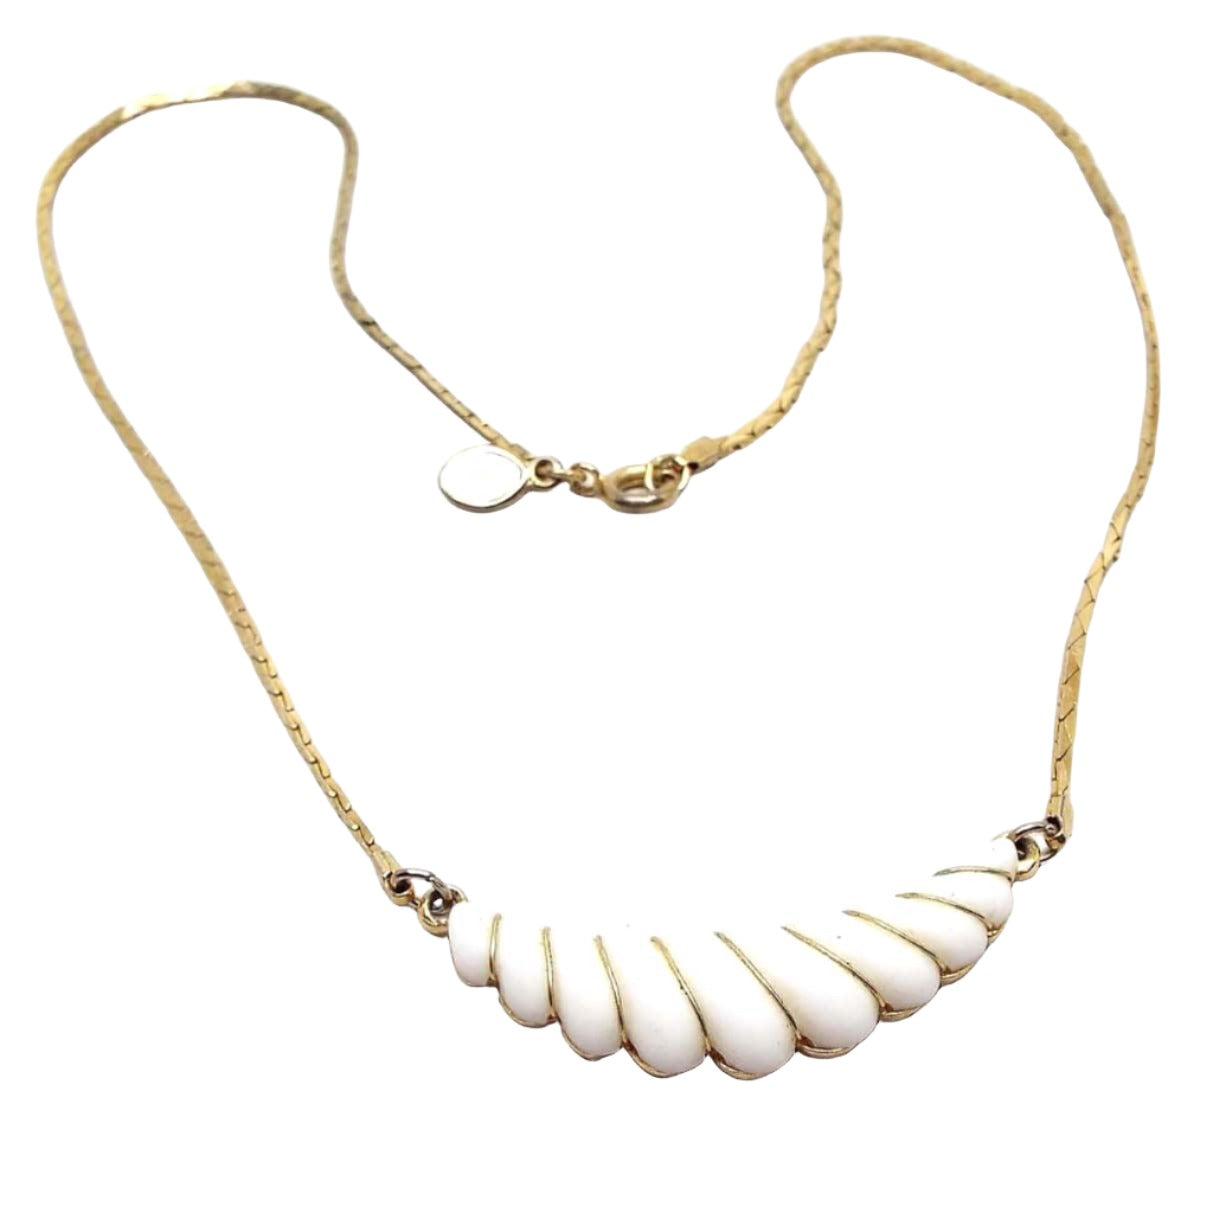 Front view of the retro vintage Avon pendant necklace. The metal is gold tone in color. The bottom pendant area is curved on top and scalloped on the bottom. There is a white plastic front with gold tone wire wrapping in between each scalloped area. 